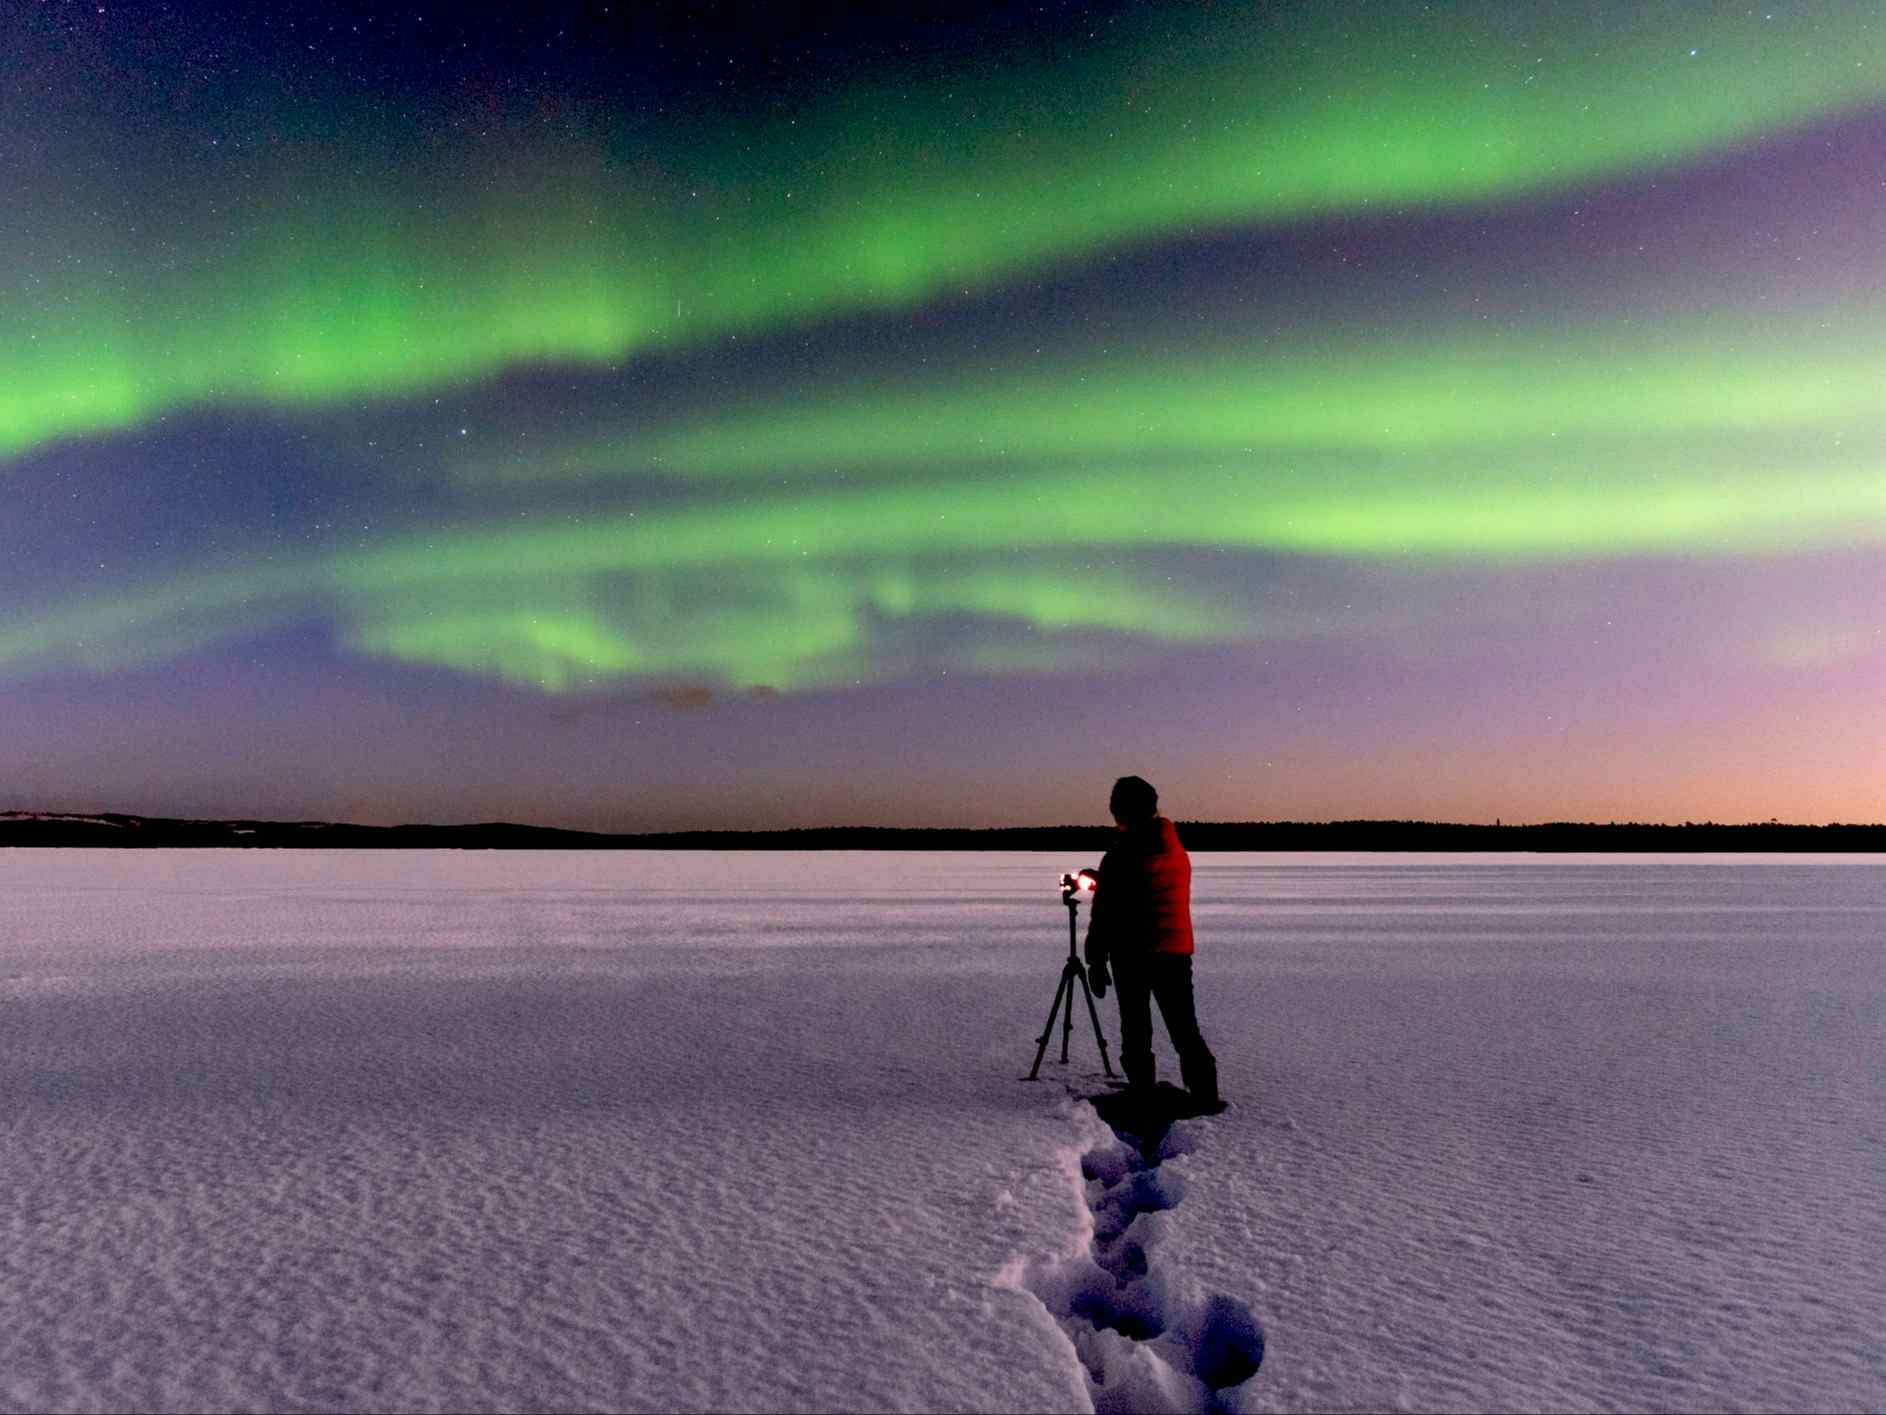 Man taking photos of the northern lights with tripod in Lapland.